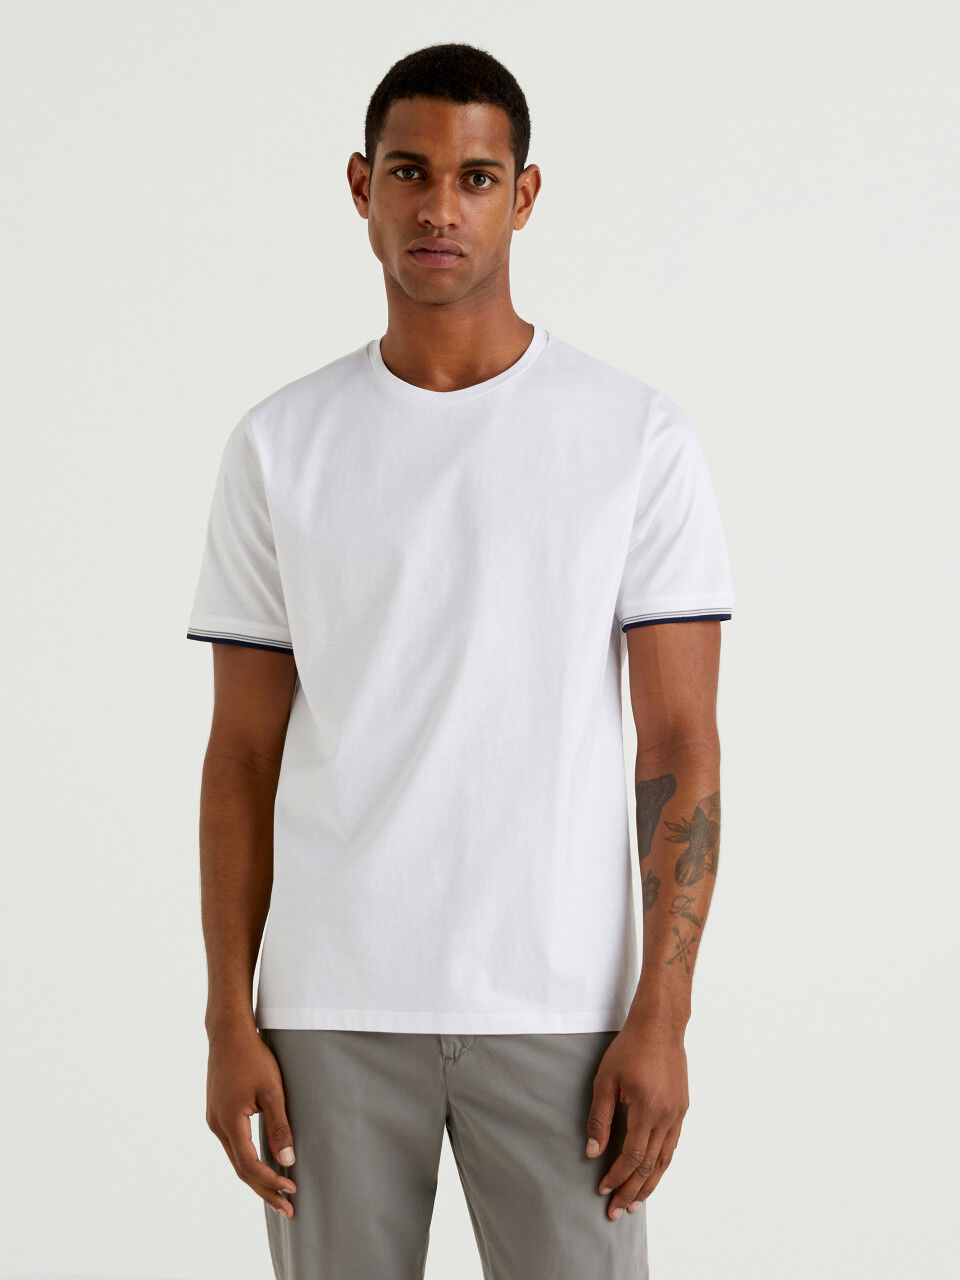 Crew neck t-shirt in pure cotton